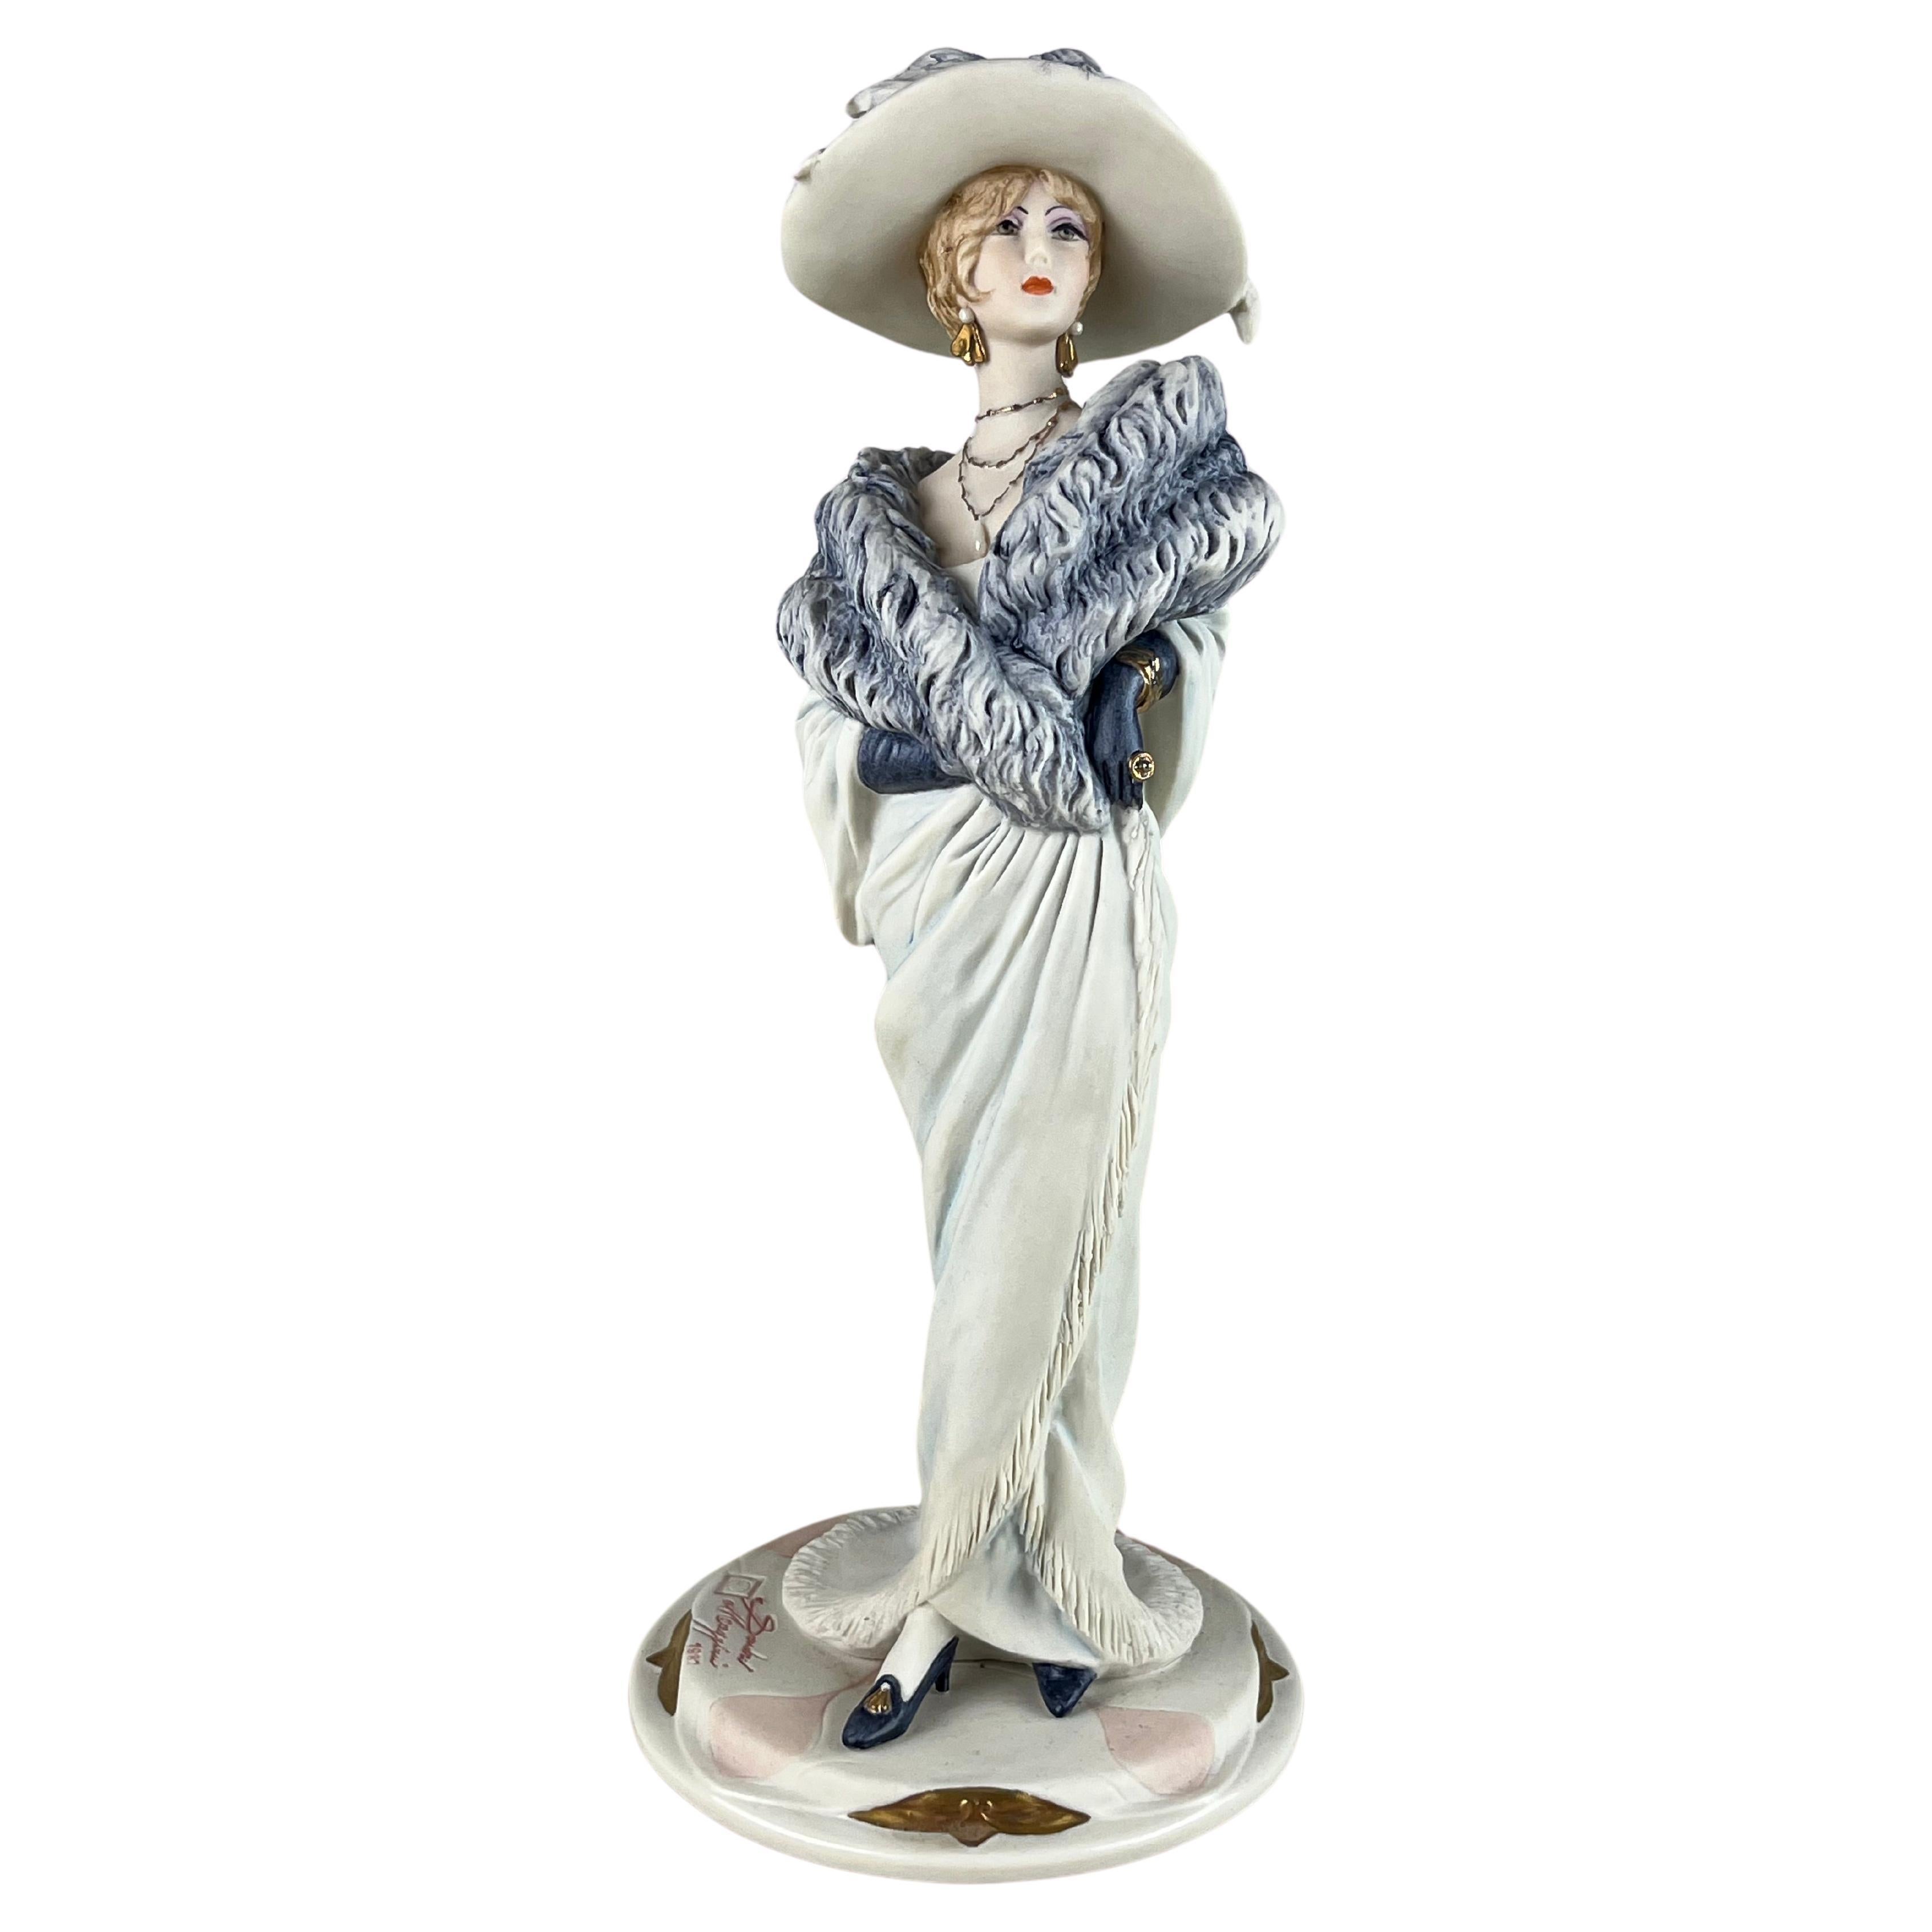 Capodimonte figurine by Sandro Maggioni, Italy, 1980s Represents a model from 1908.
Complete and in excellent condition.
 The works of this artist denote a predisposition for attention to every detail and for a notable harmony of forms and